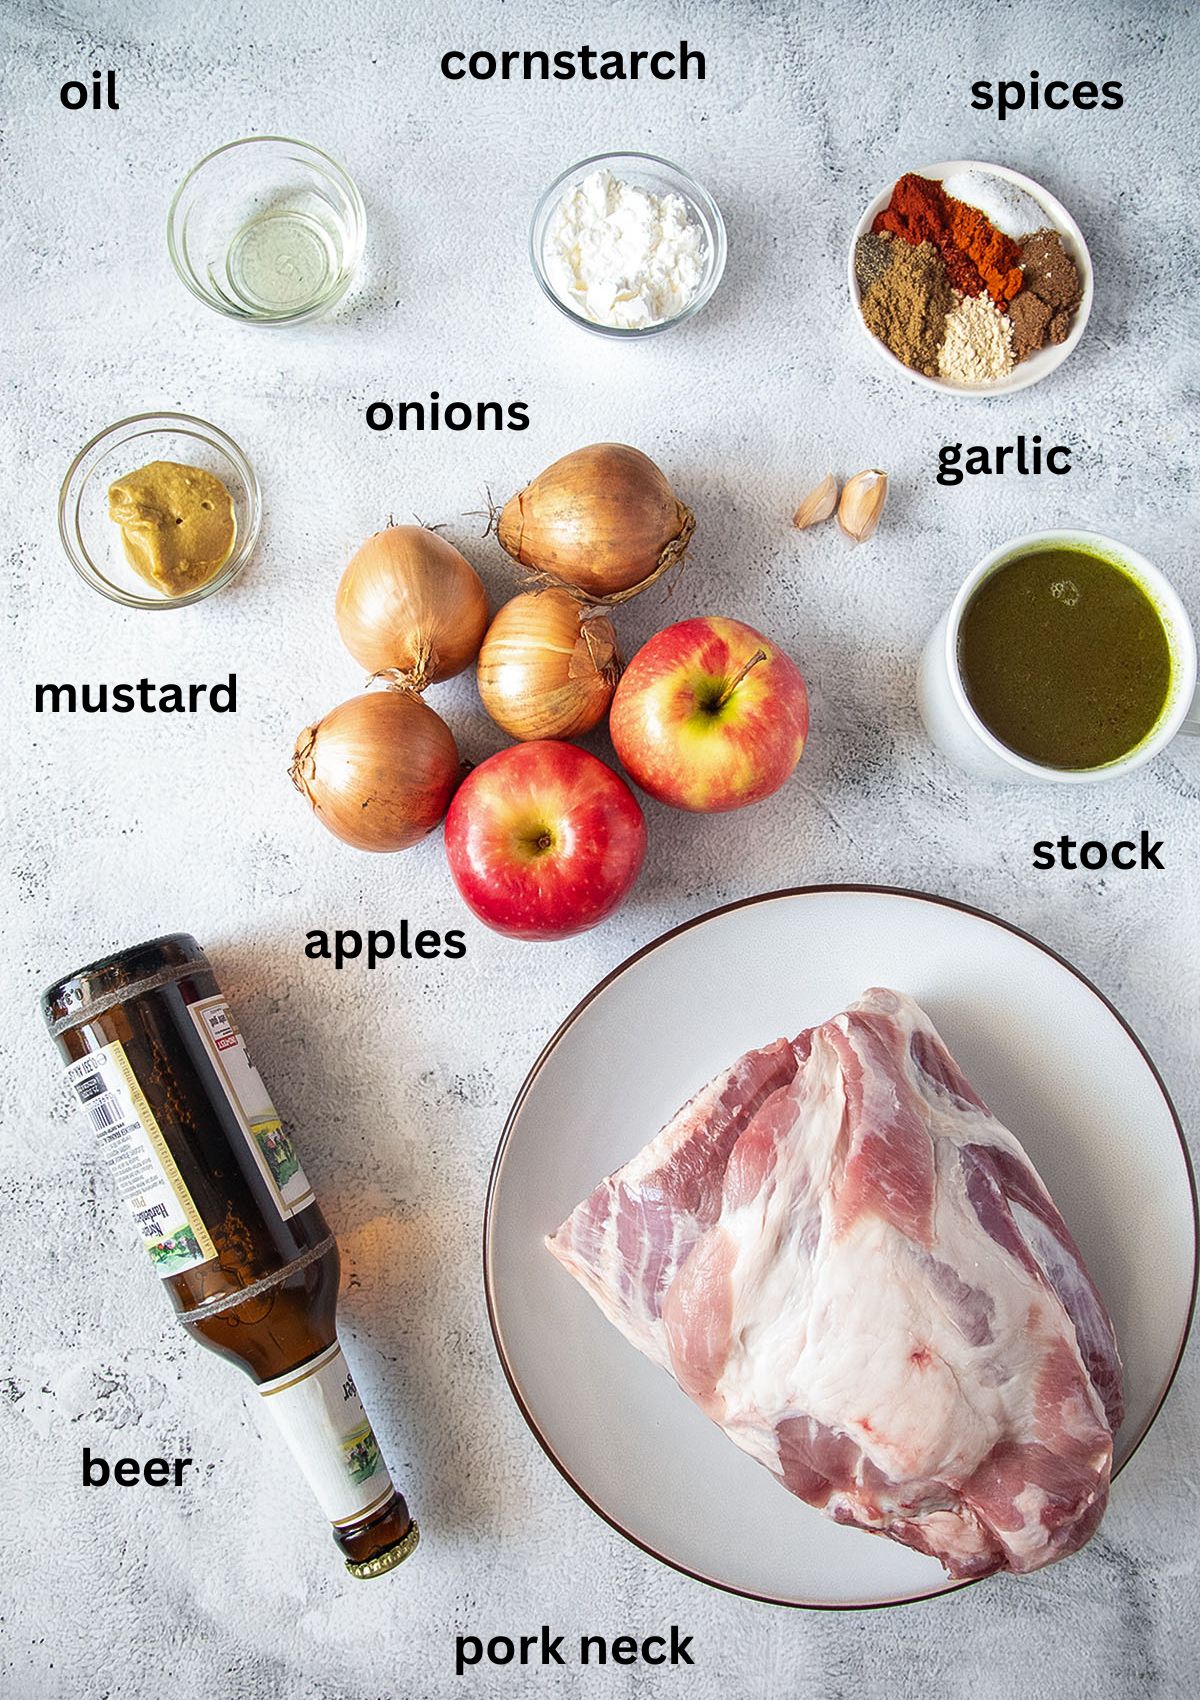 listed ingredients need for roasting pork neck with beer and apple gravy.